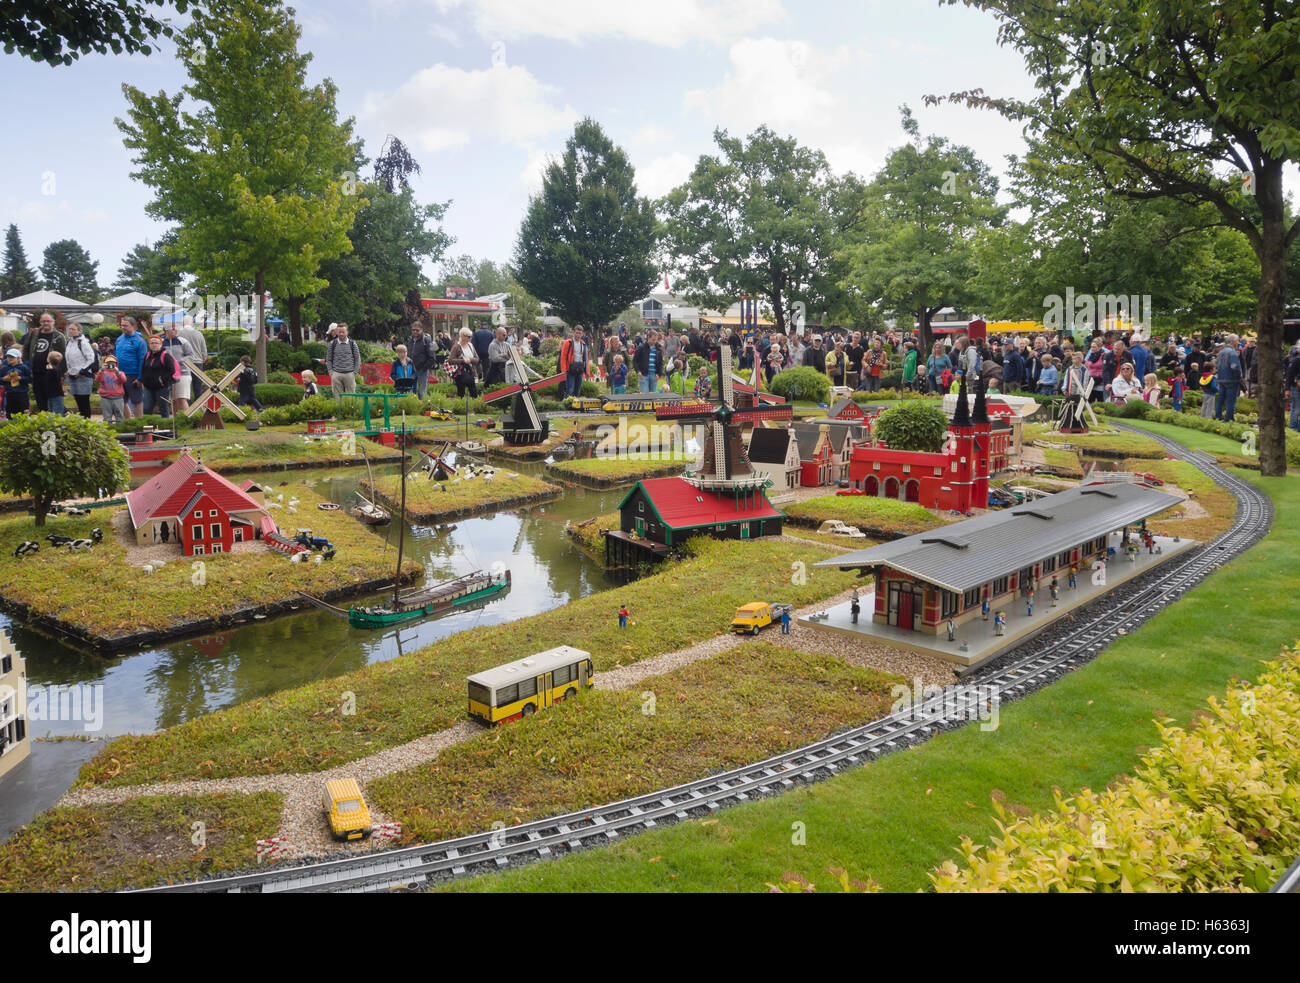 Dutch countryside with windmills and canals recreated in Lego bricks in Legoland Billund Denmark Stock Photo